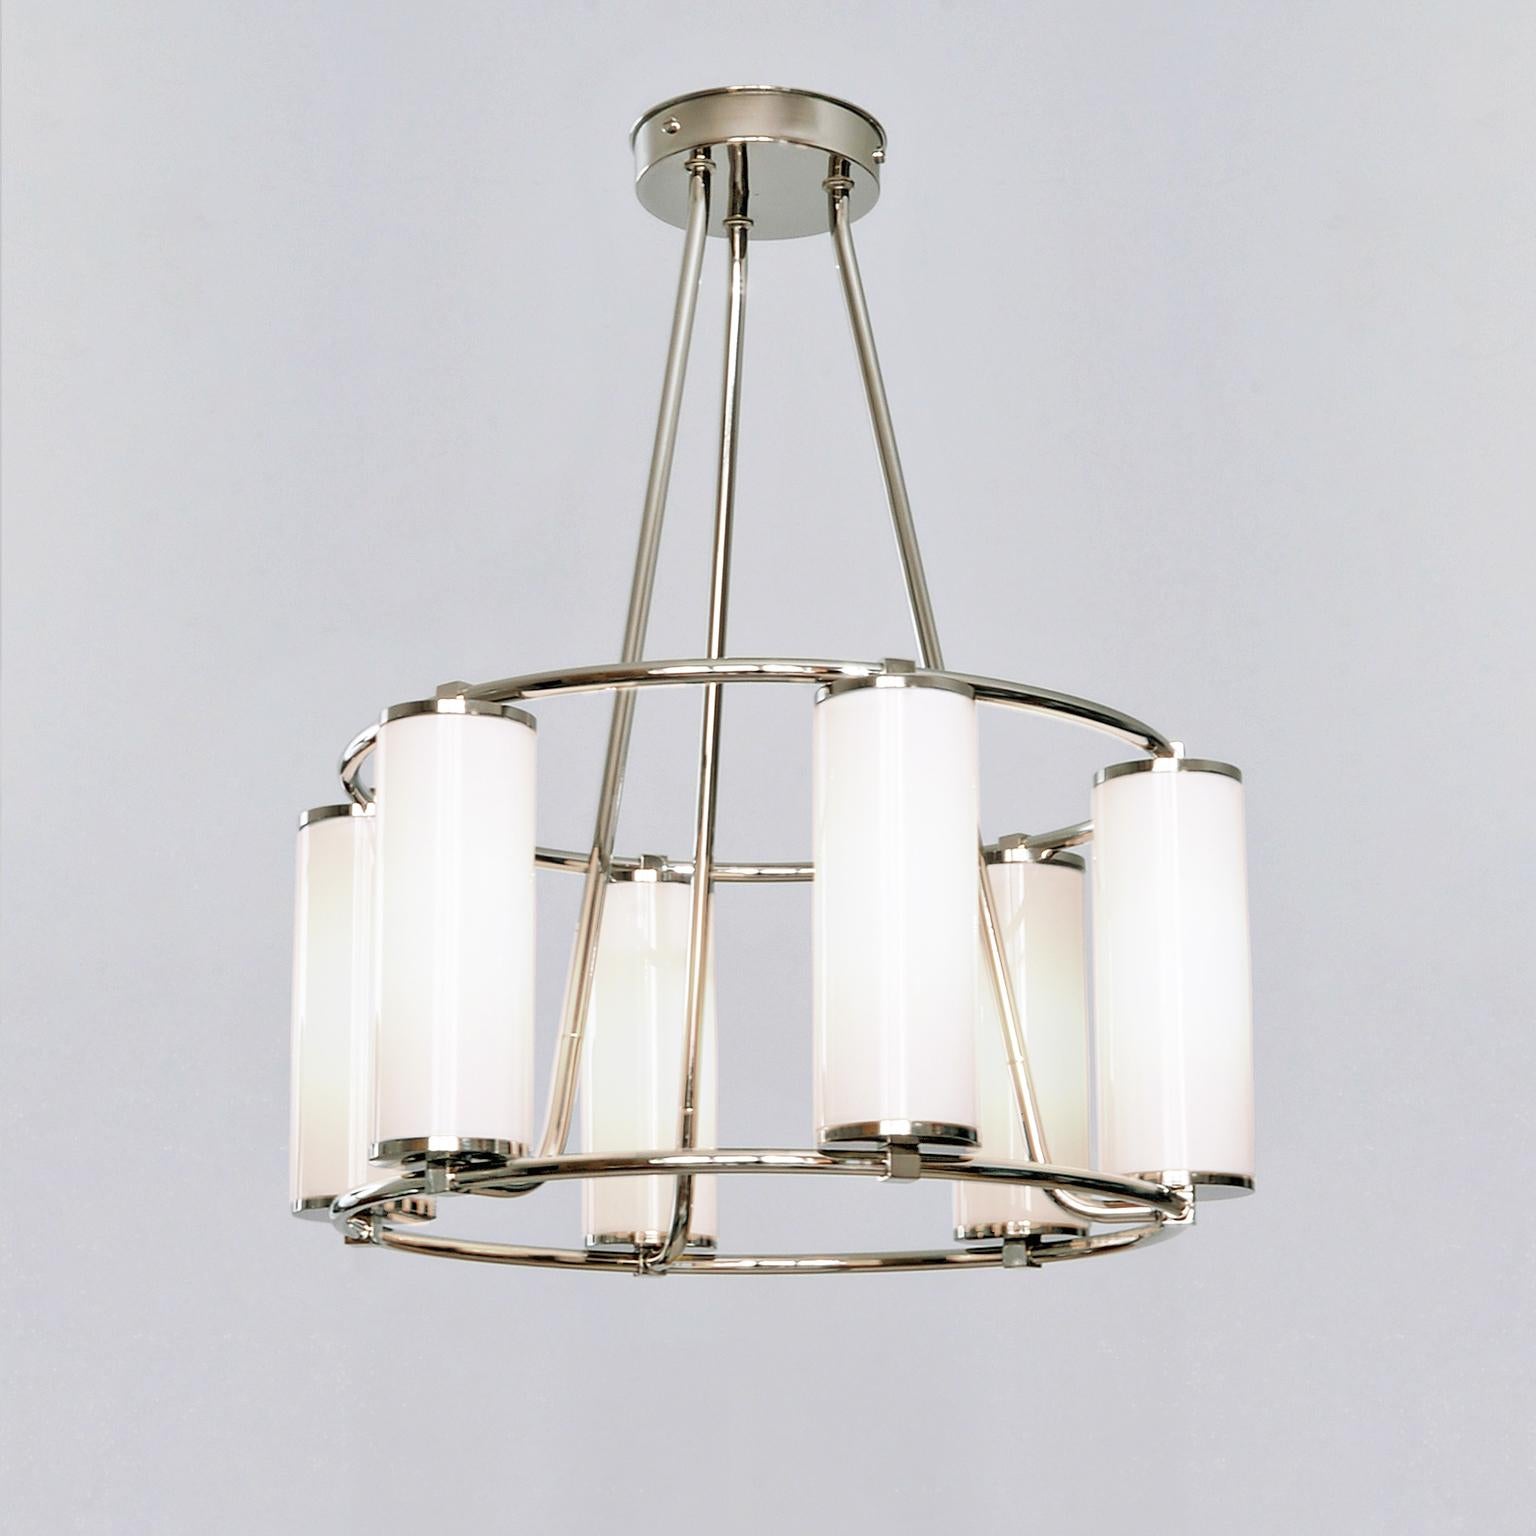 Modernist circular six-light 'Olympia' chandelier. Nickel-plated brass and opaline glass cylinders, manufactured by GMD Berlin. Hand made in solid brass, customizable. Also available in version with 3, 9 and 12 lights.

Technical details: 6 E 14